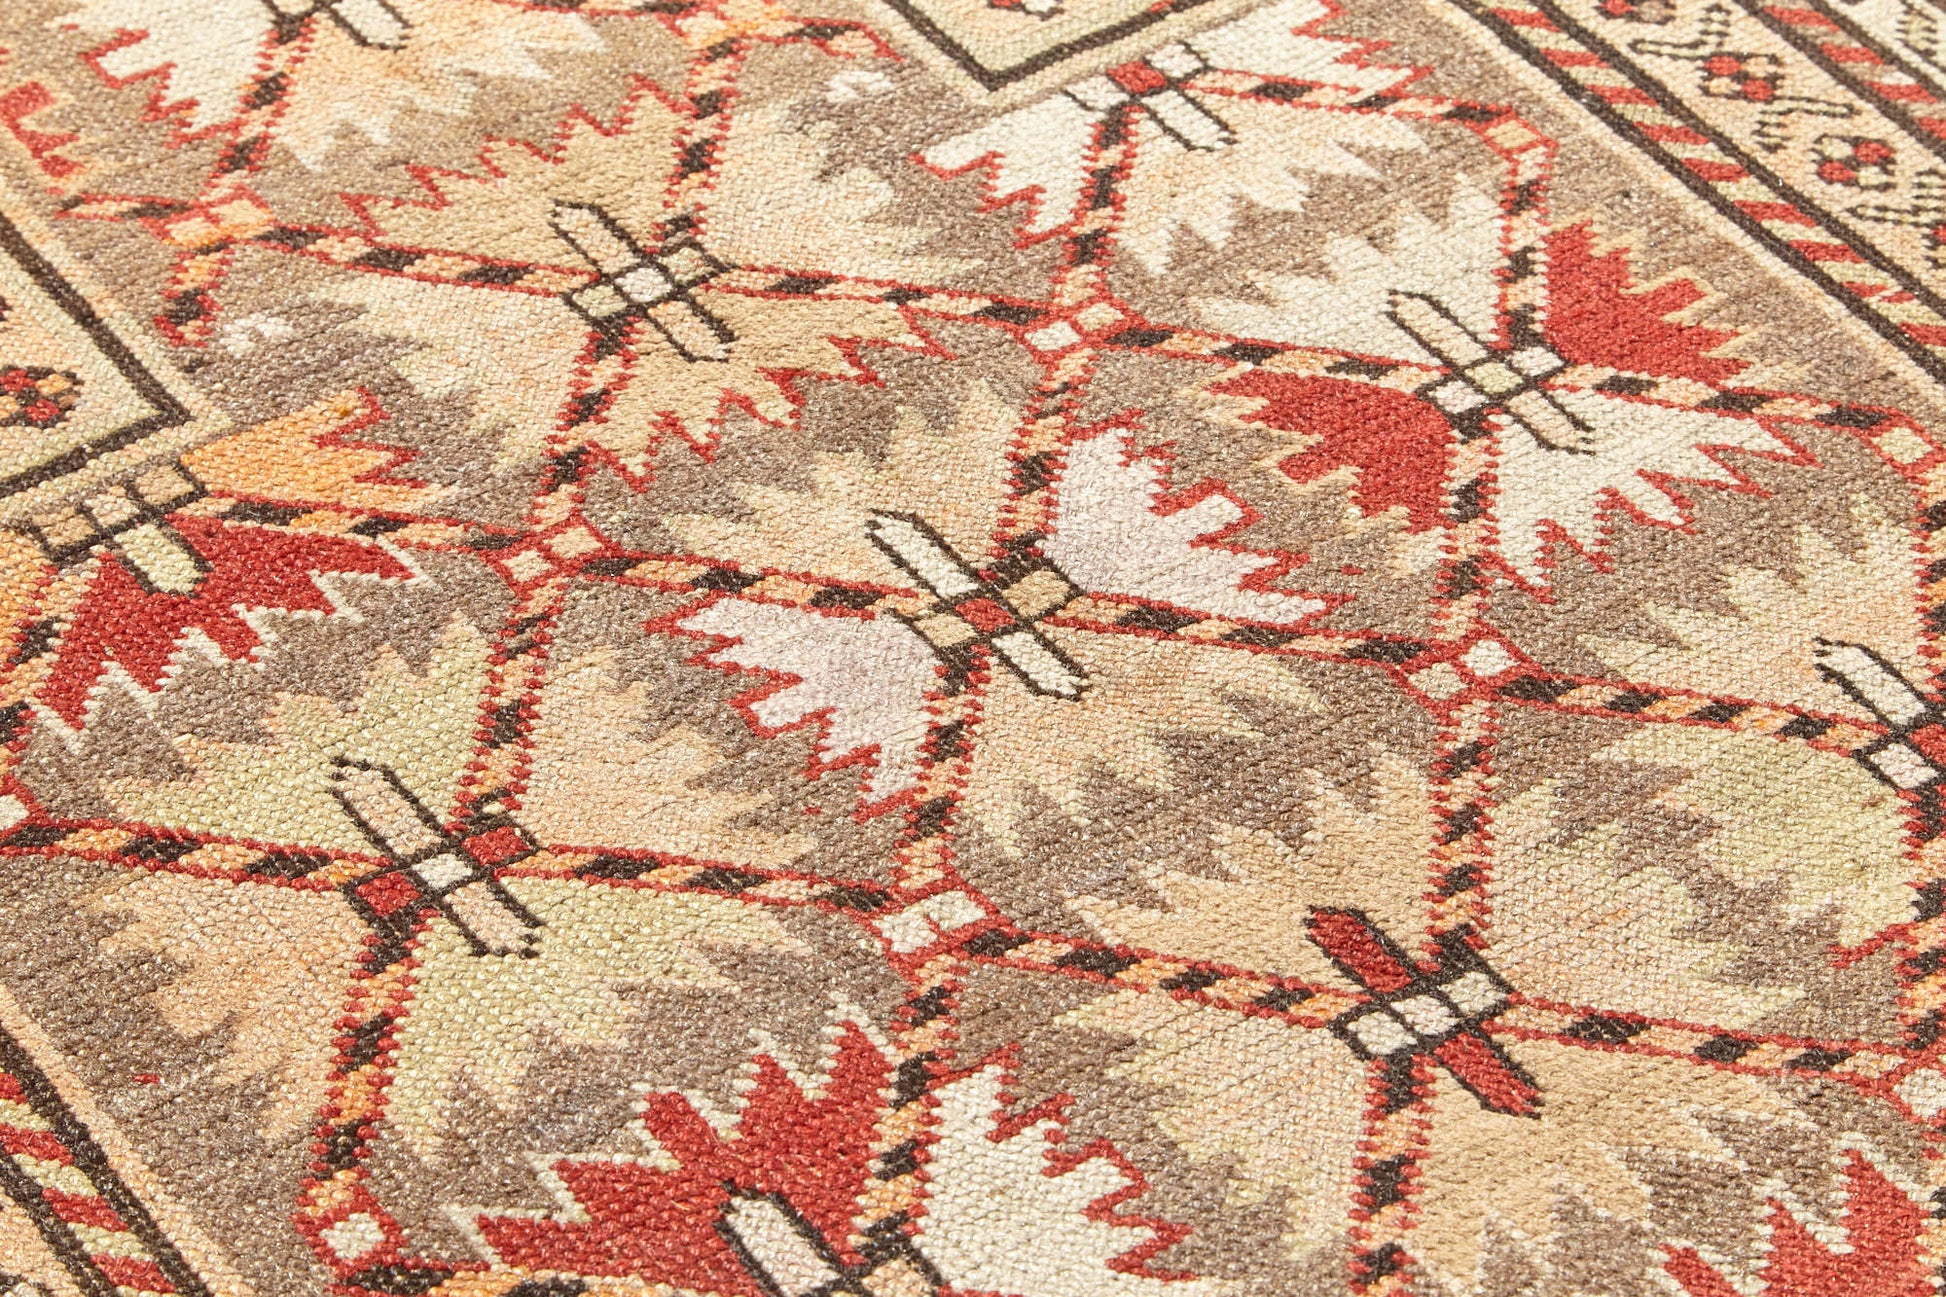 Beautiful neutrals in this hand woven antique Shirvan Prayer rug, beige tan base with red, peach and brown designs throughout. Perfect for a bedroom, office, living room or as a wall hanging - Available from King Kennedy Rugs Los Angeles